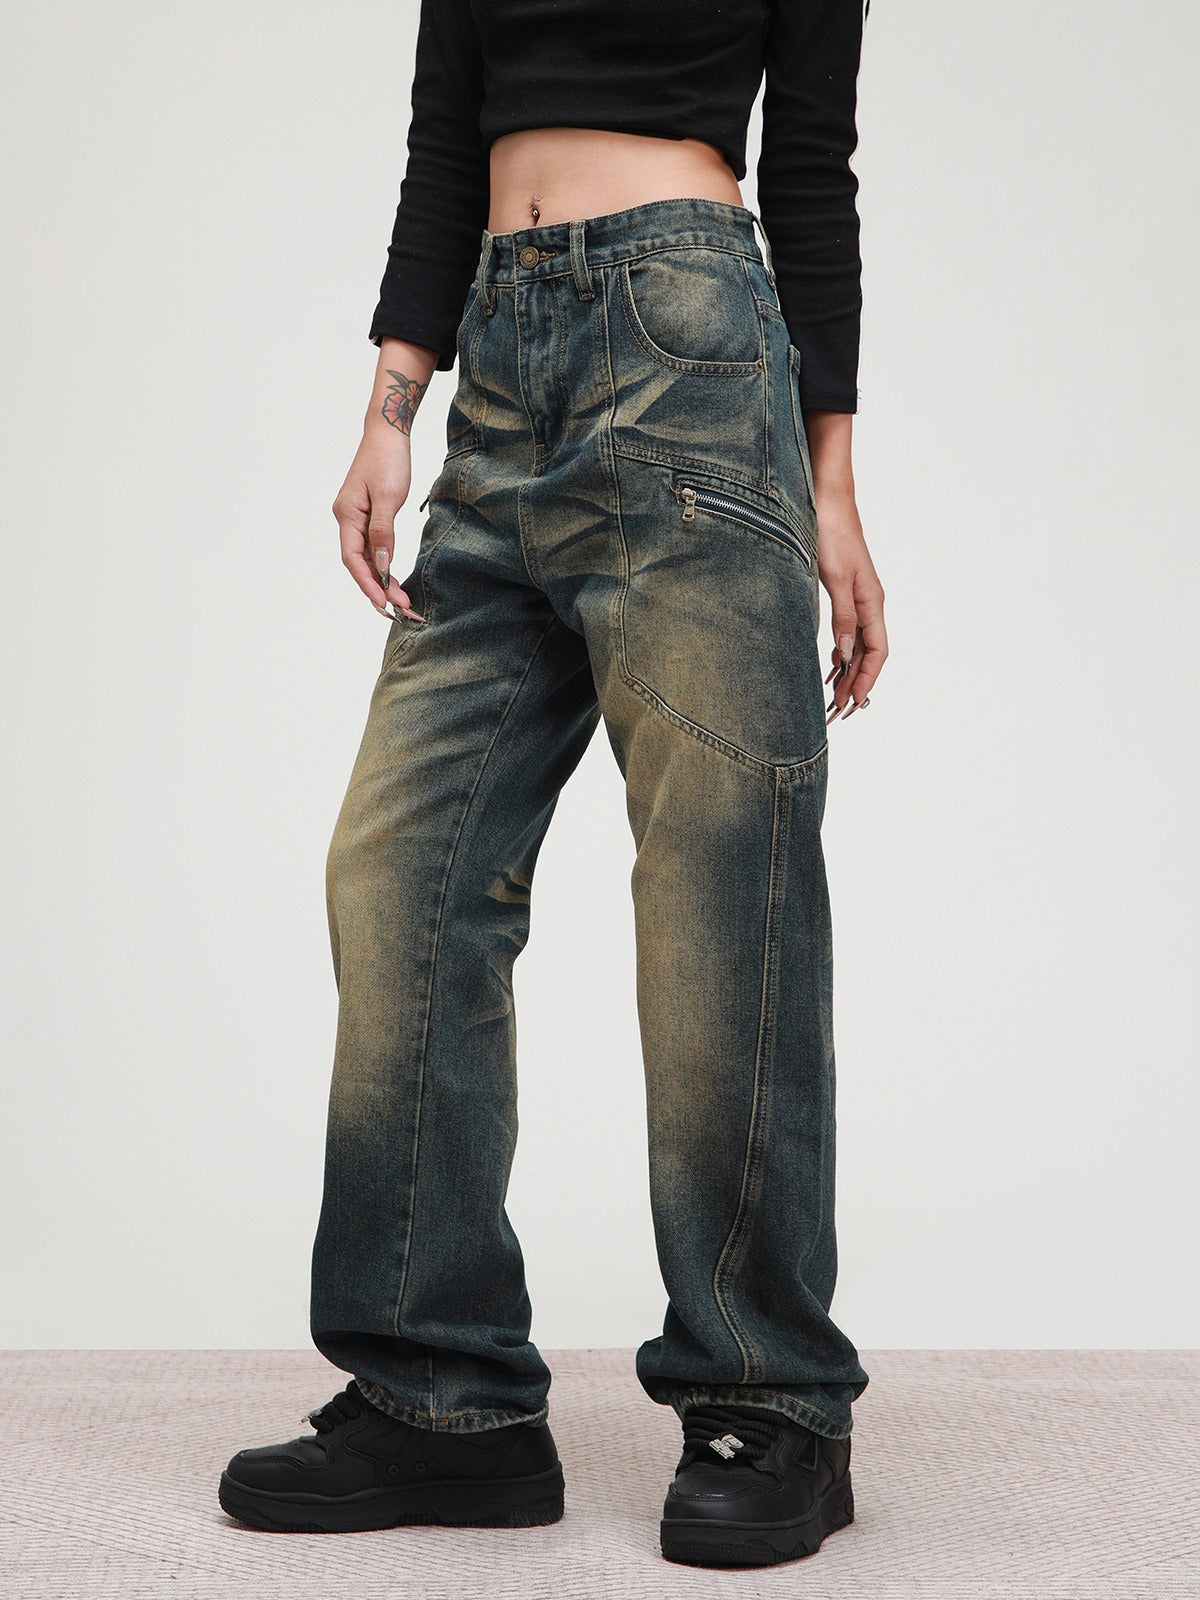 American patchwork washed jeans pants